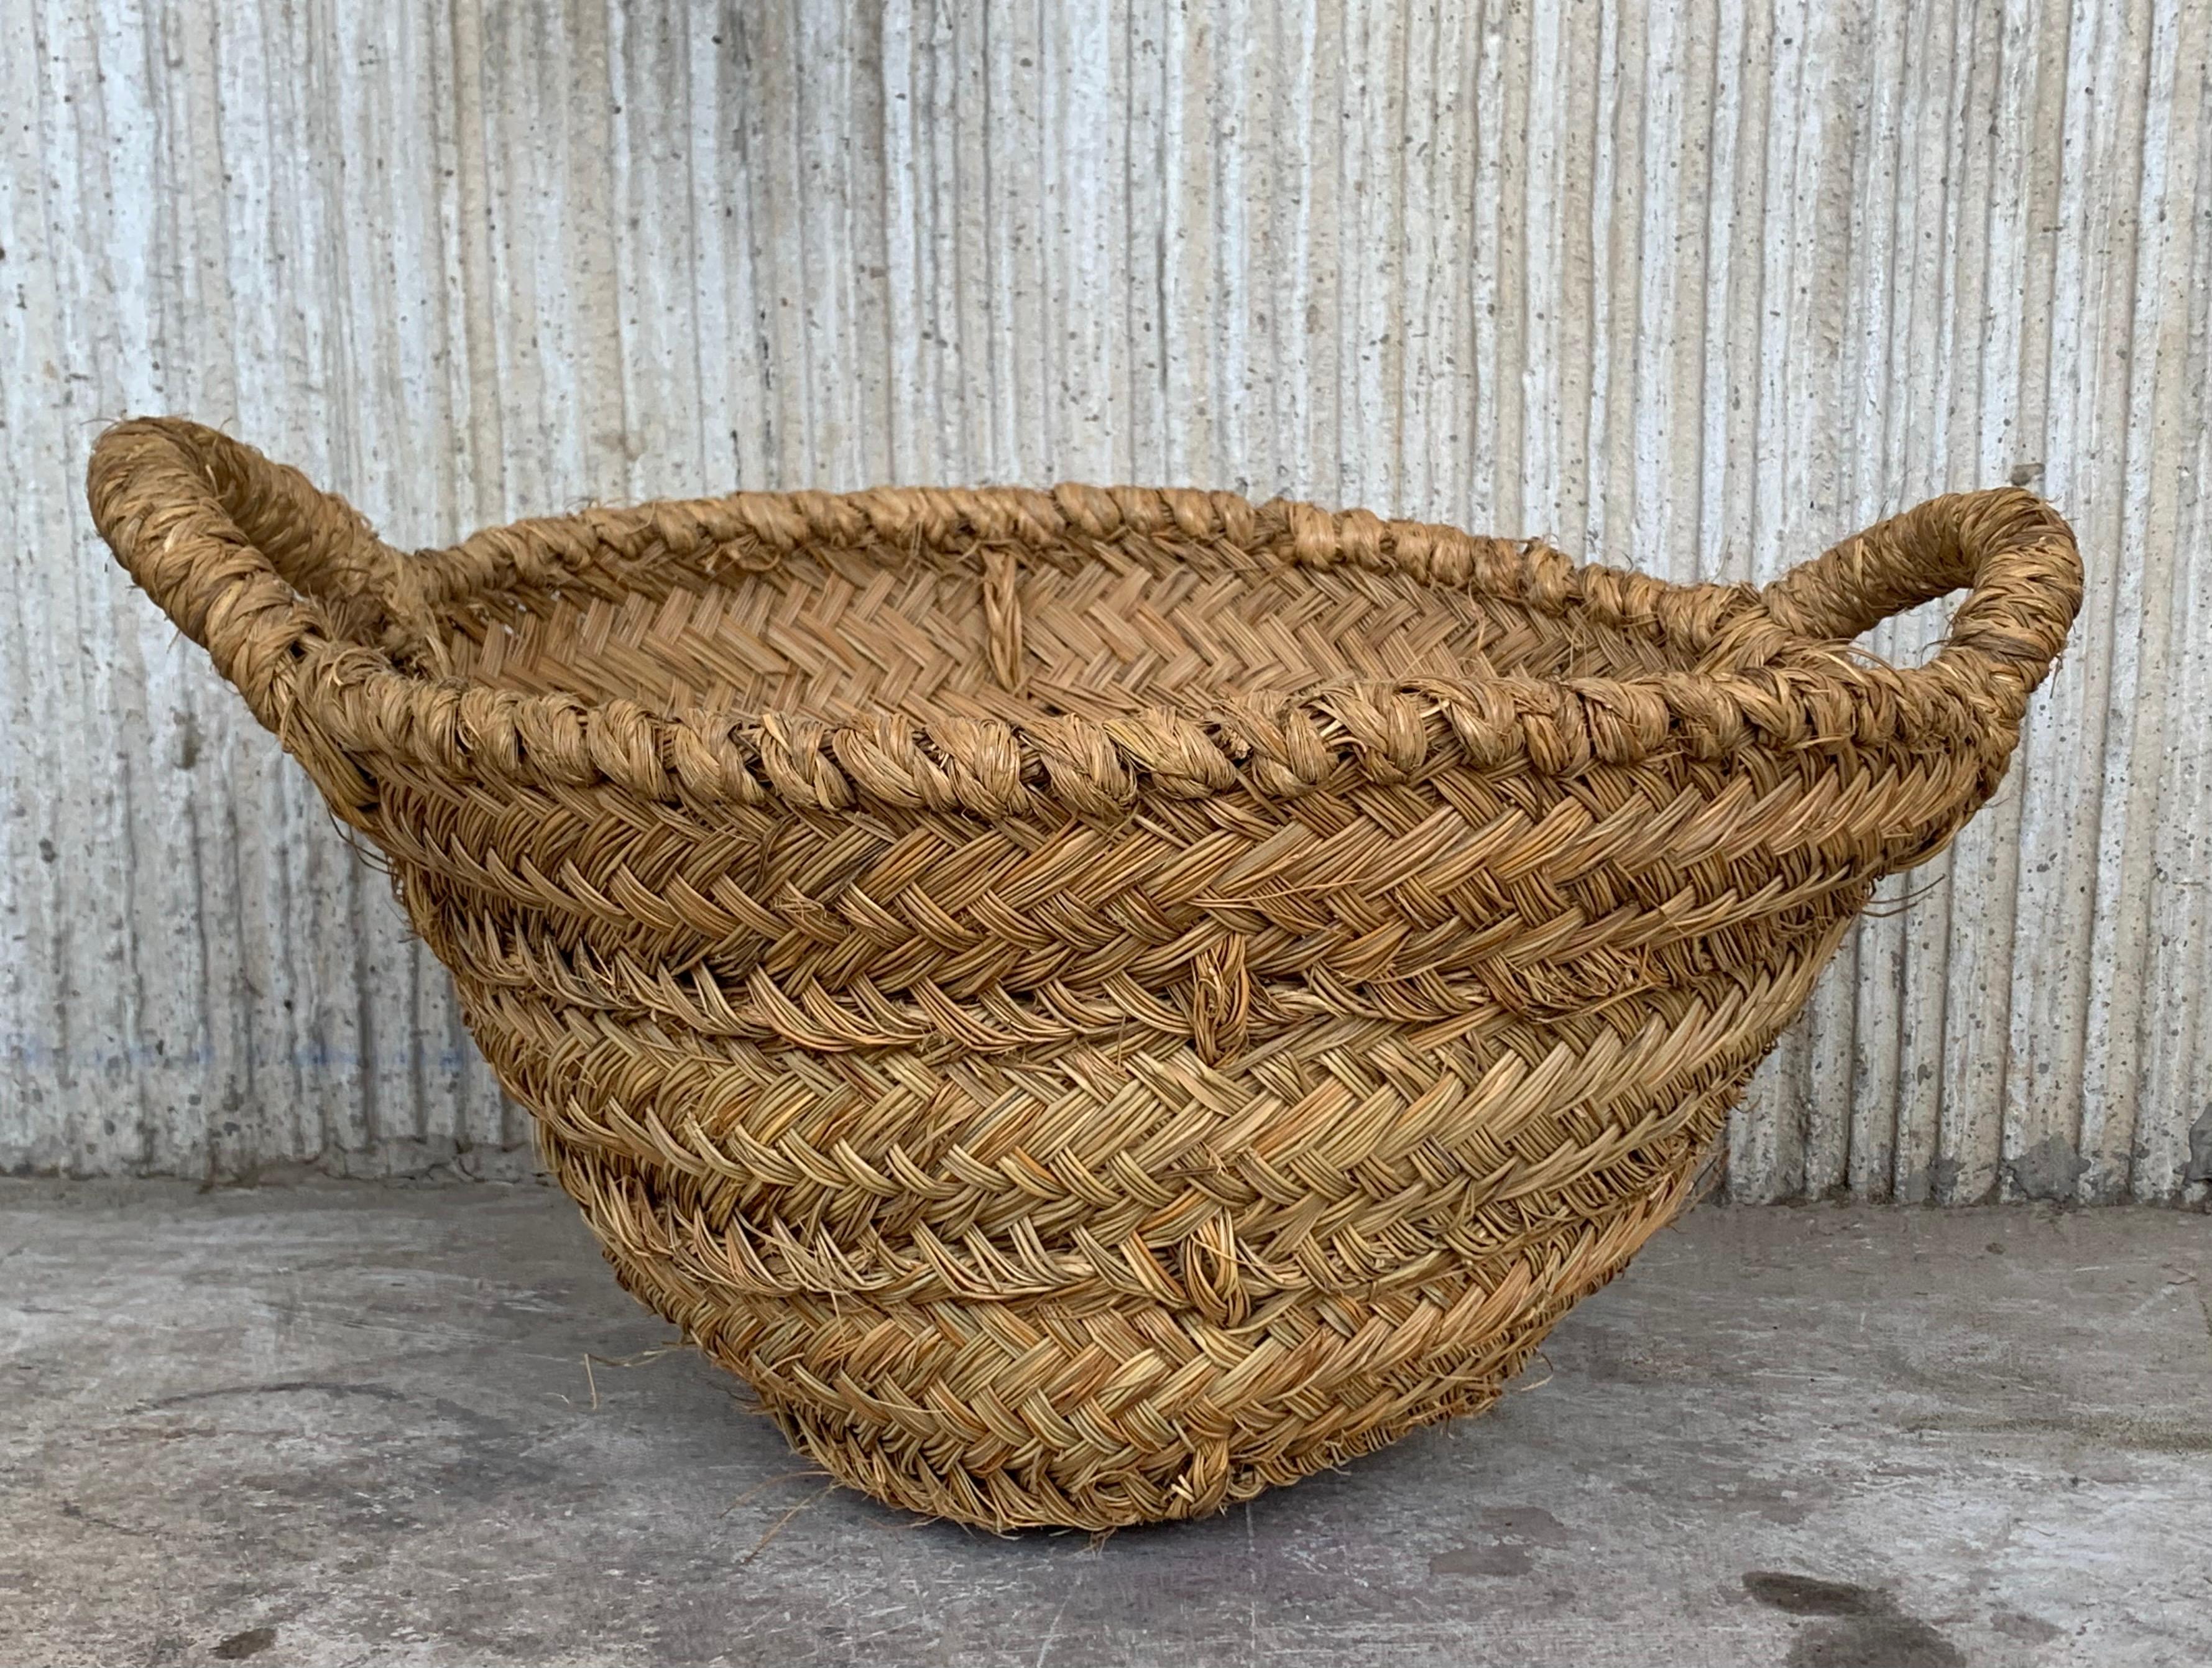 Rustic Spanish chateau champagne grape harvesting basket constructed from woven wicker reeds. Features a thick braided top with handles on each end 
 Perfect for decorating and display.

We have available 22 basquets.

 